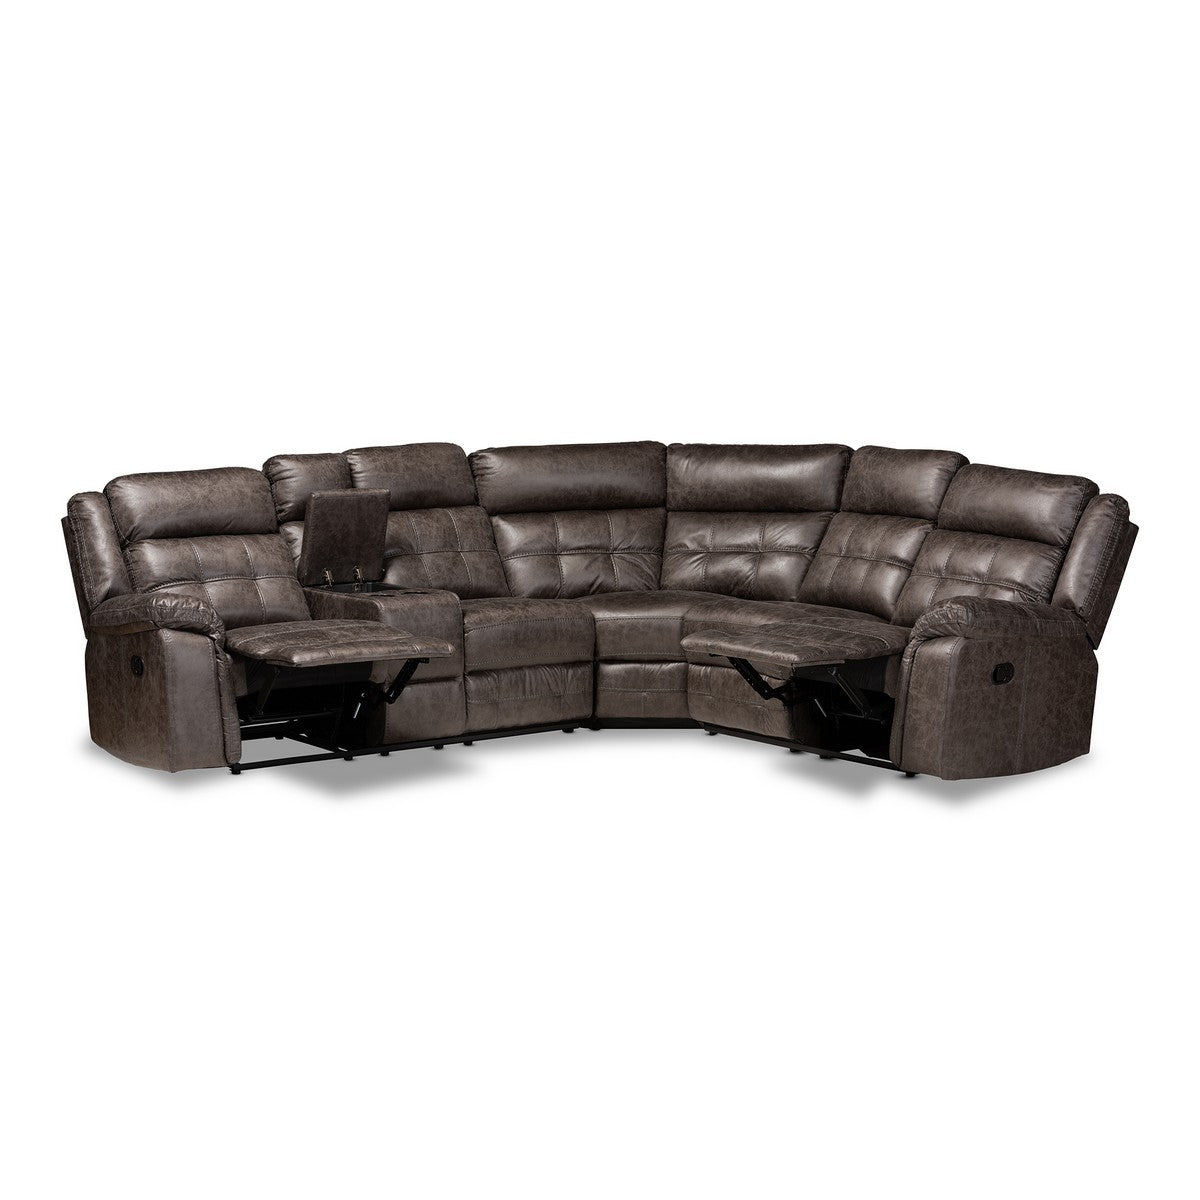 Baxton Studio Vesa Modern and Contemporary Grey Leather-Like Fabric Upholstered 6-Piece Sectional Recliner Sofa with 2 Reclining Seats